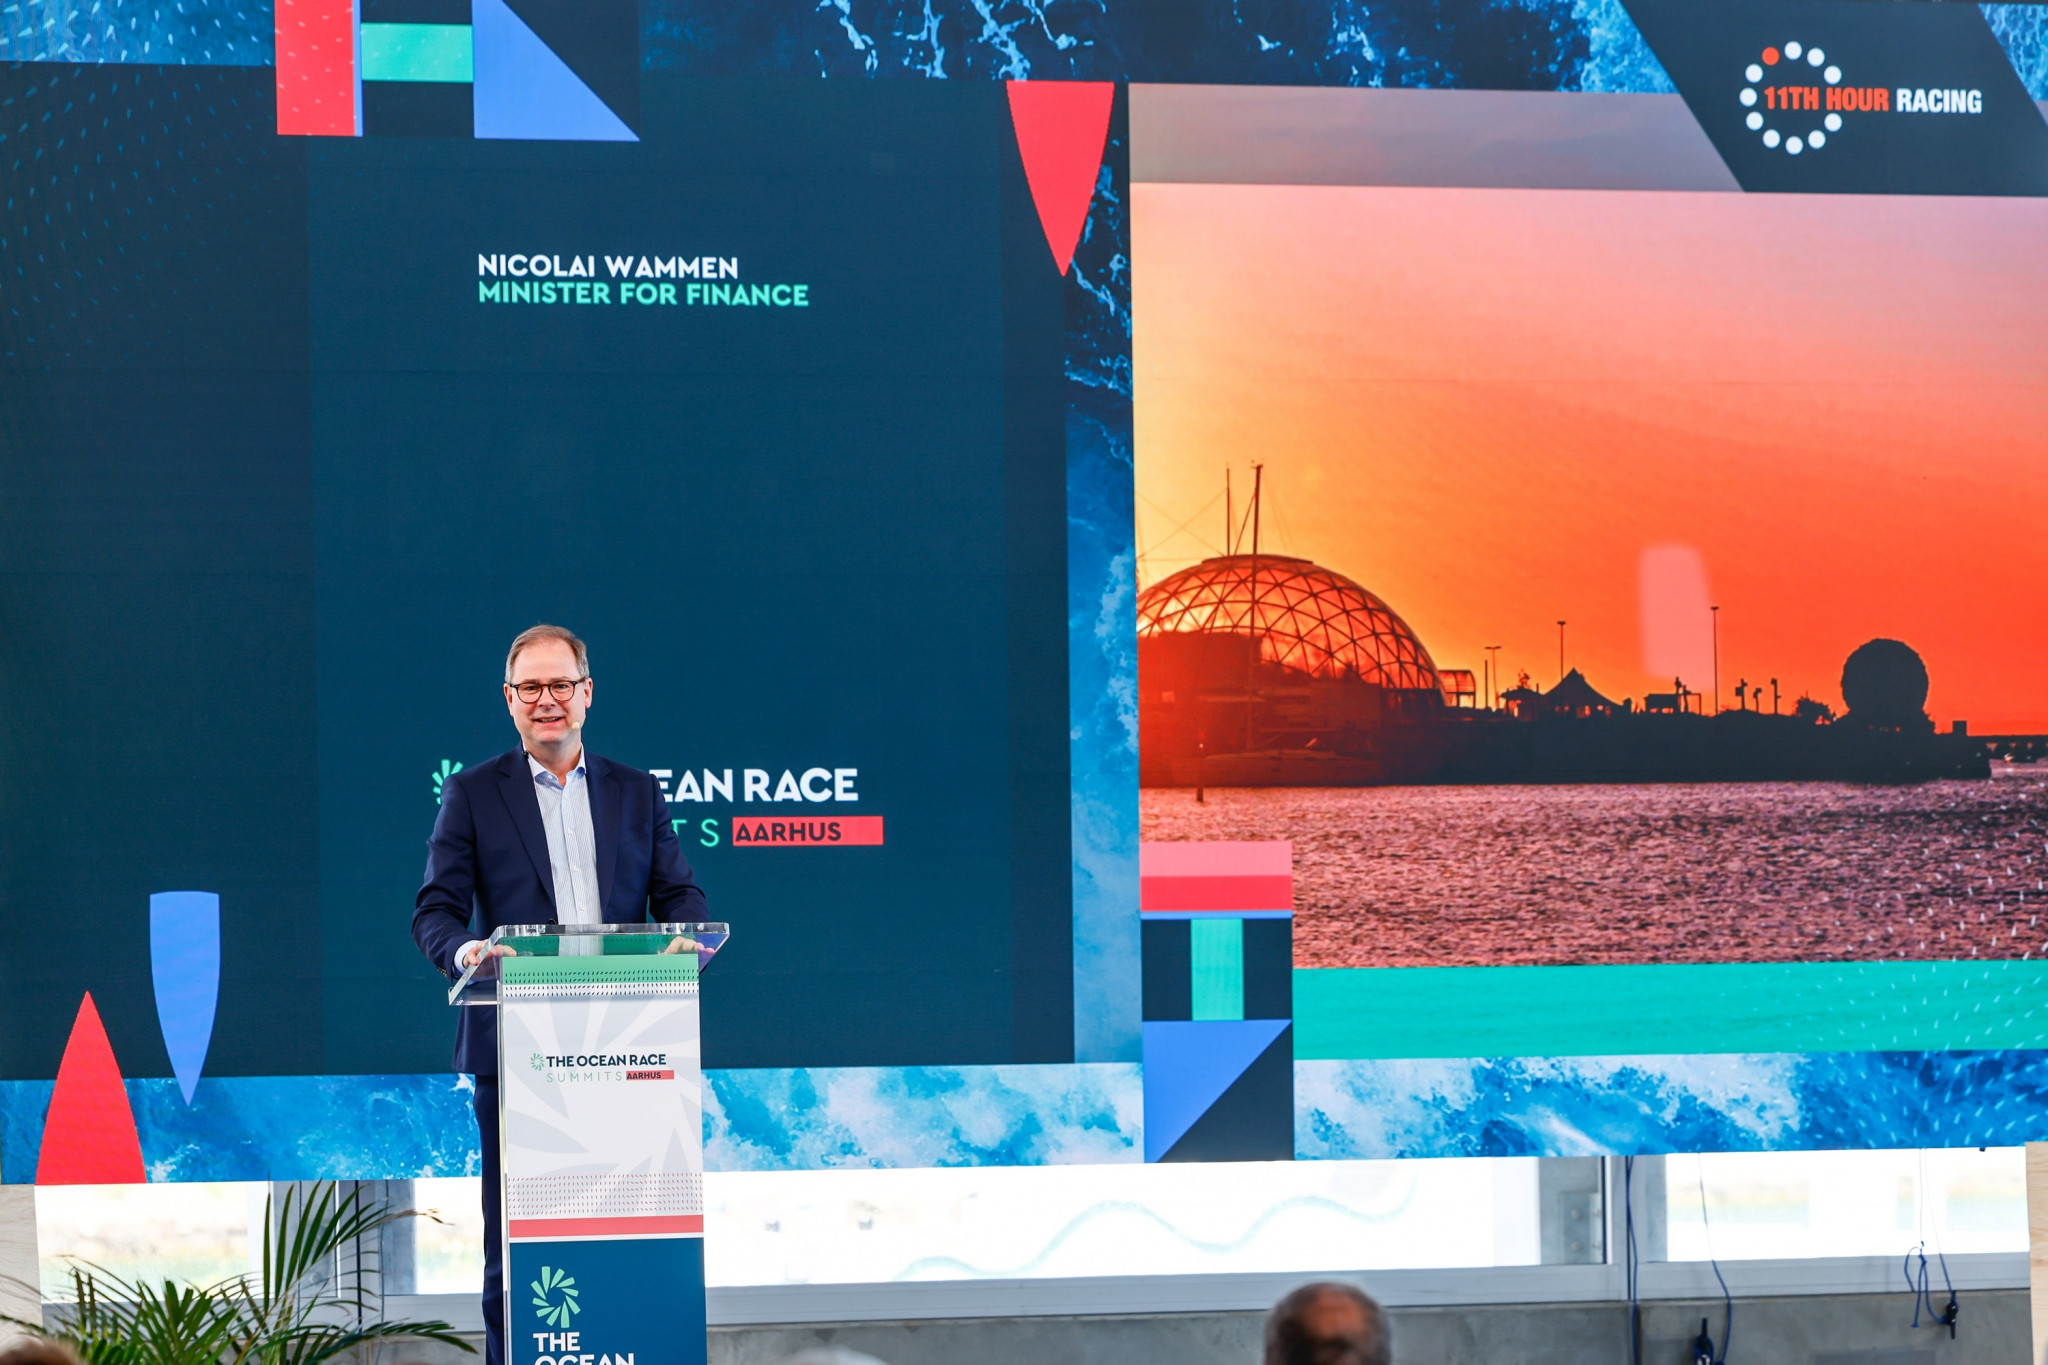 Danish Finance Minister pledges to "fight for the ocean" at Summit in Aarhus